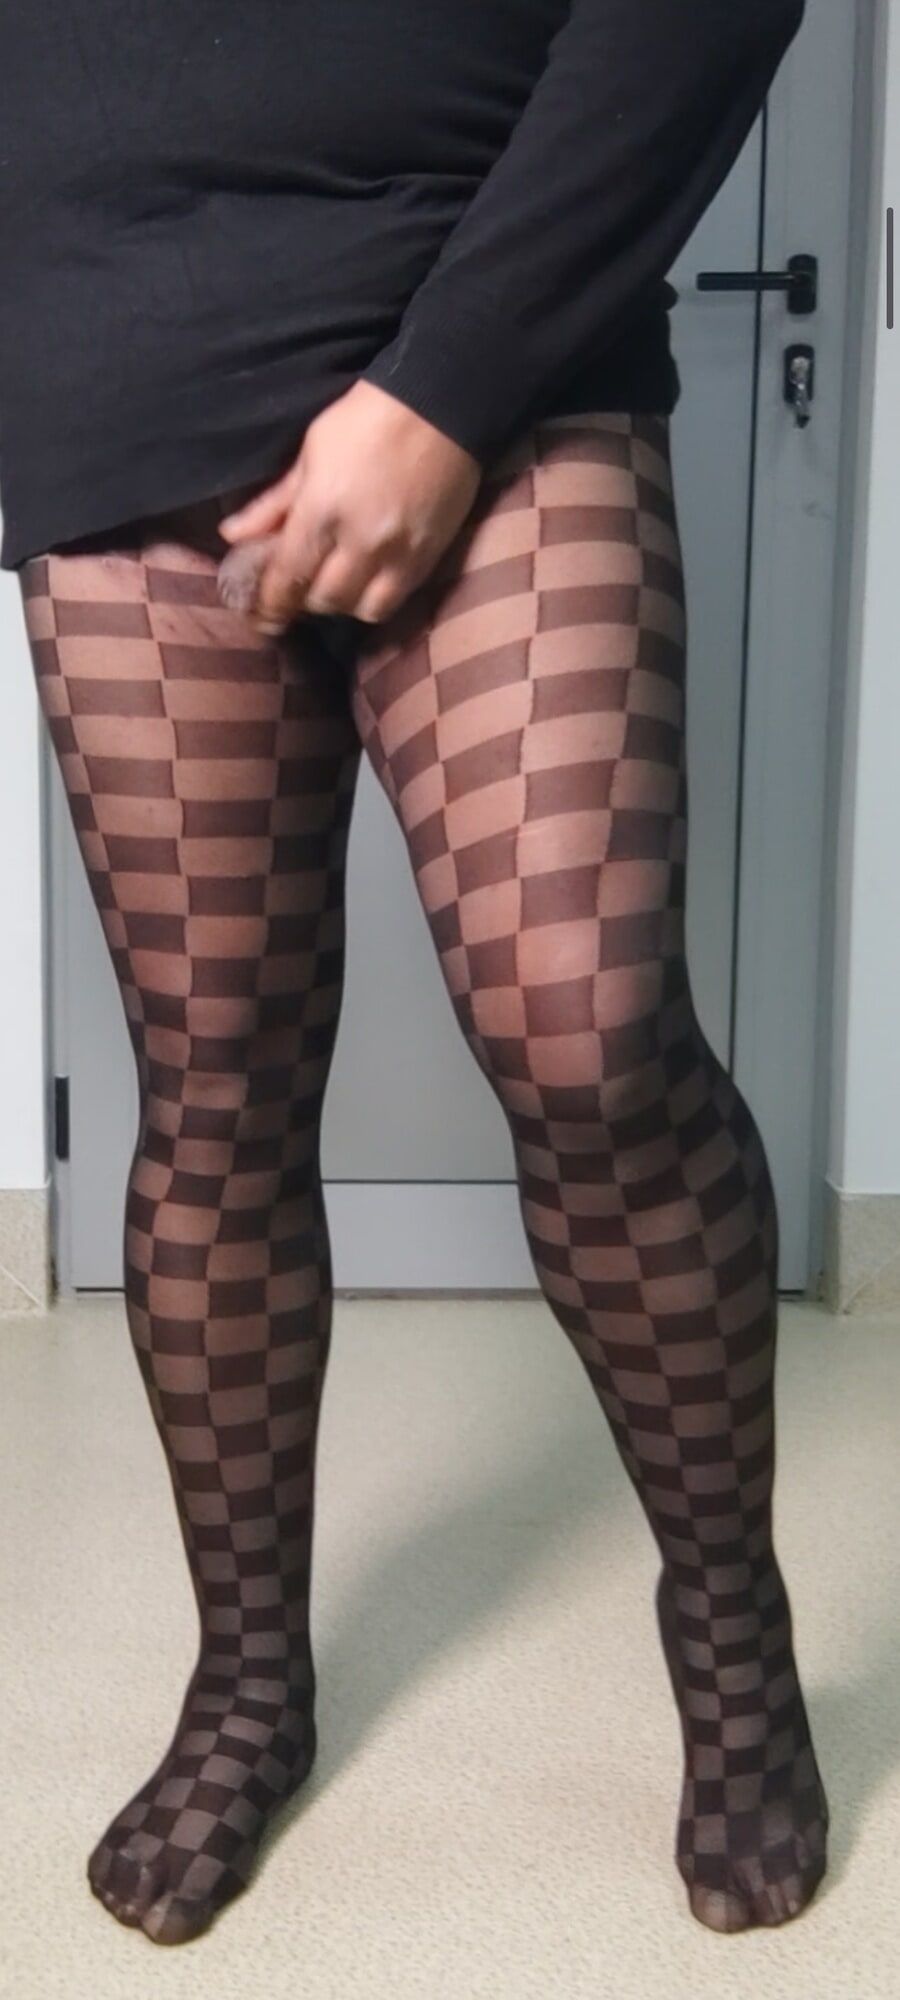 Black patterpantyhose on my sexy feet are so cool.Am i sexy? #19